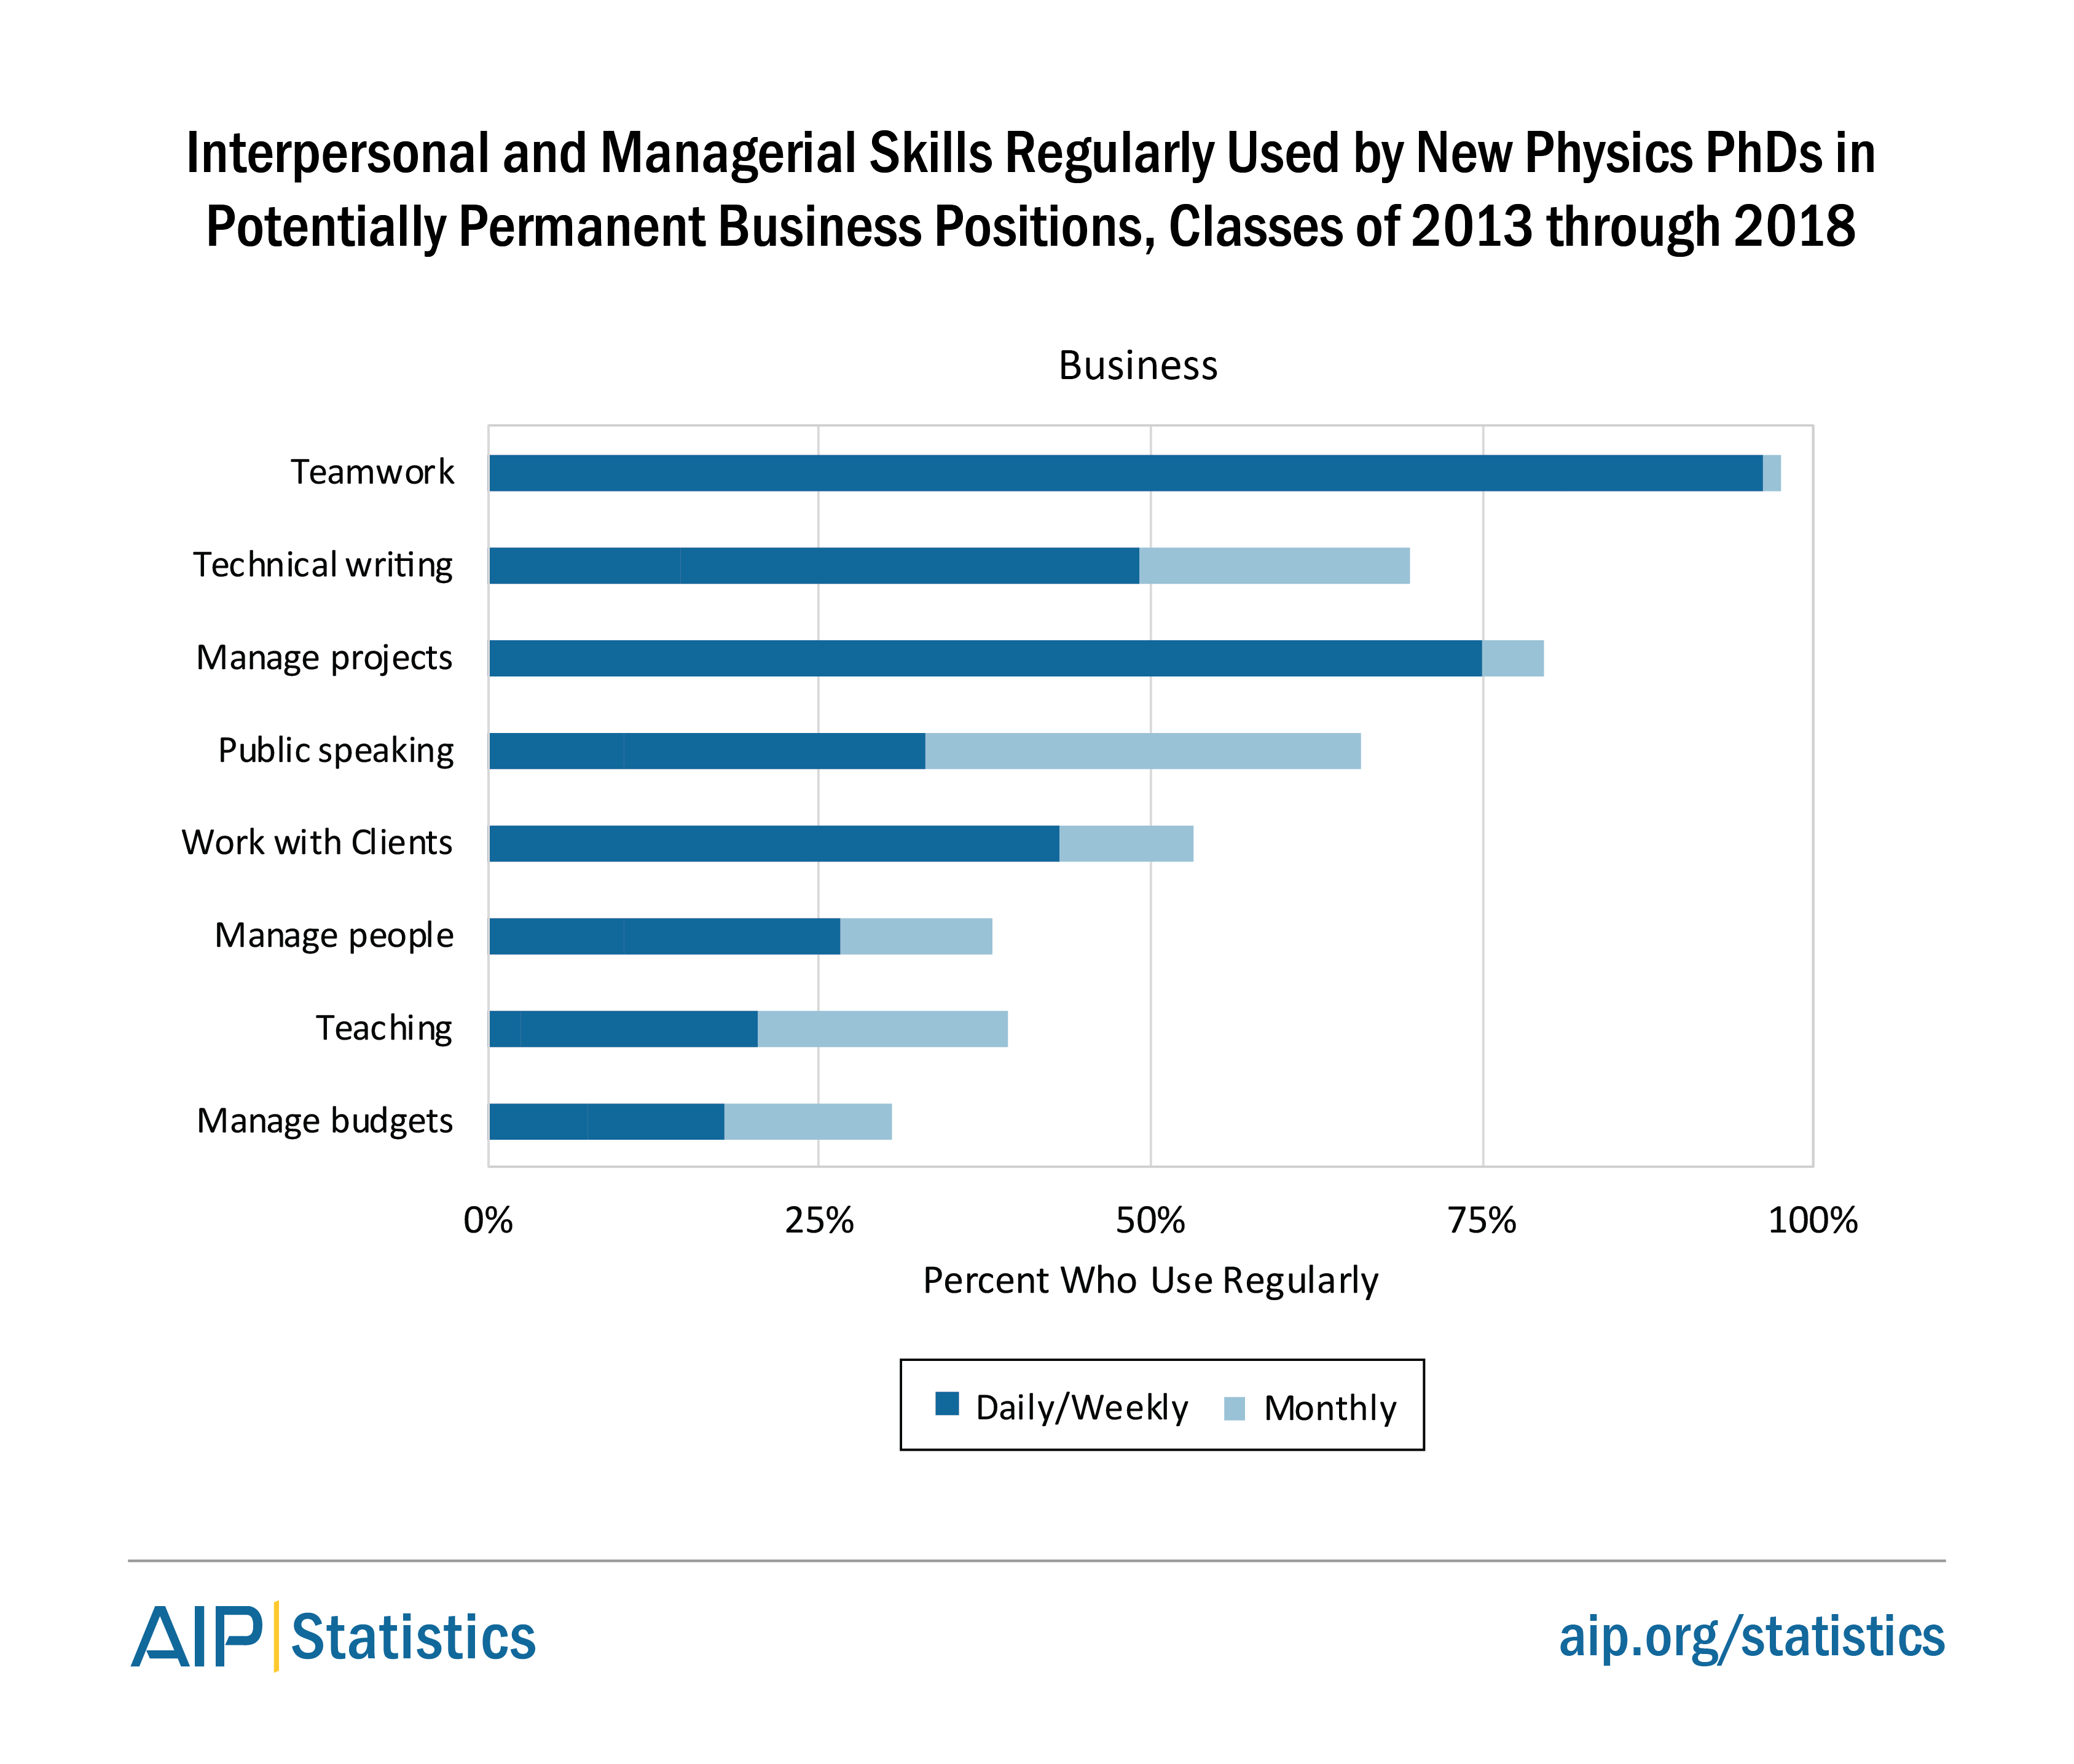 Interpersonal and Managerial Skills Used by Physics PhDs in Business Positions